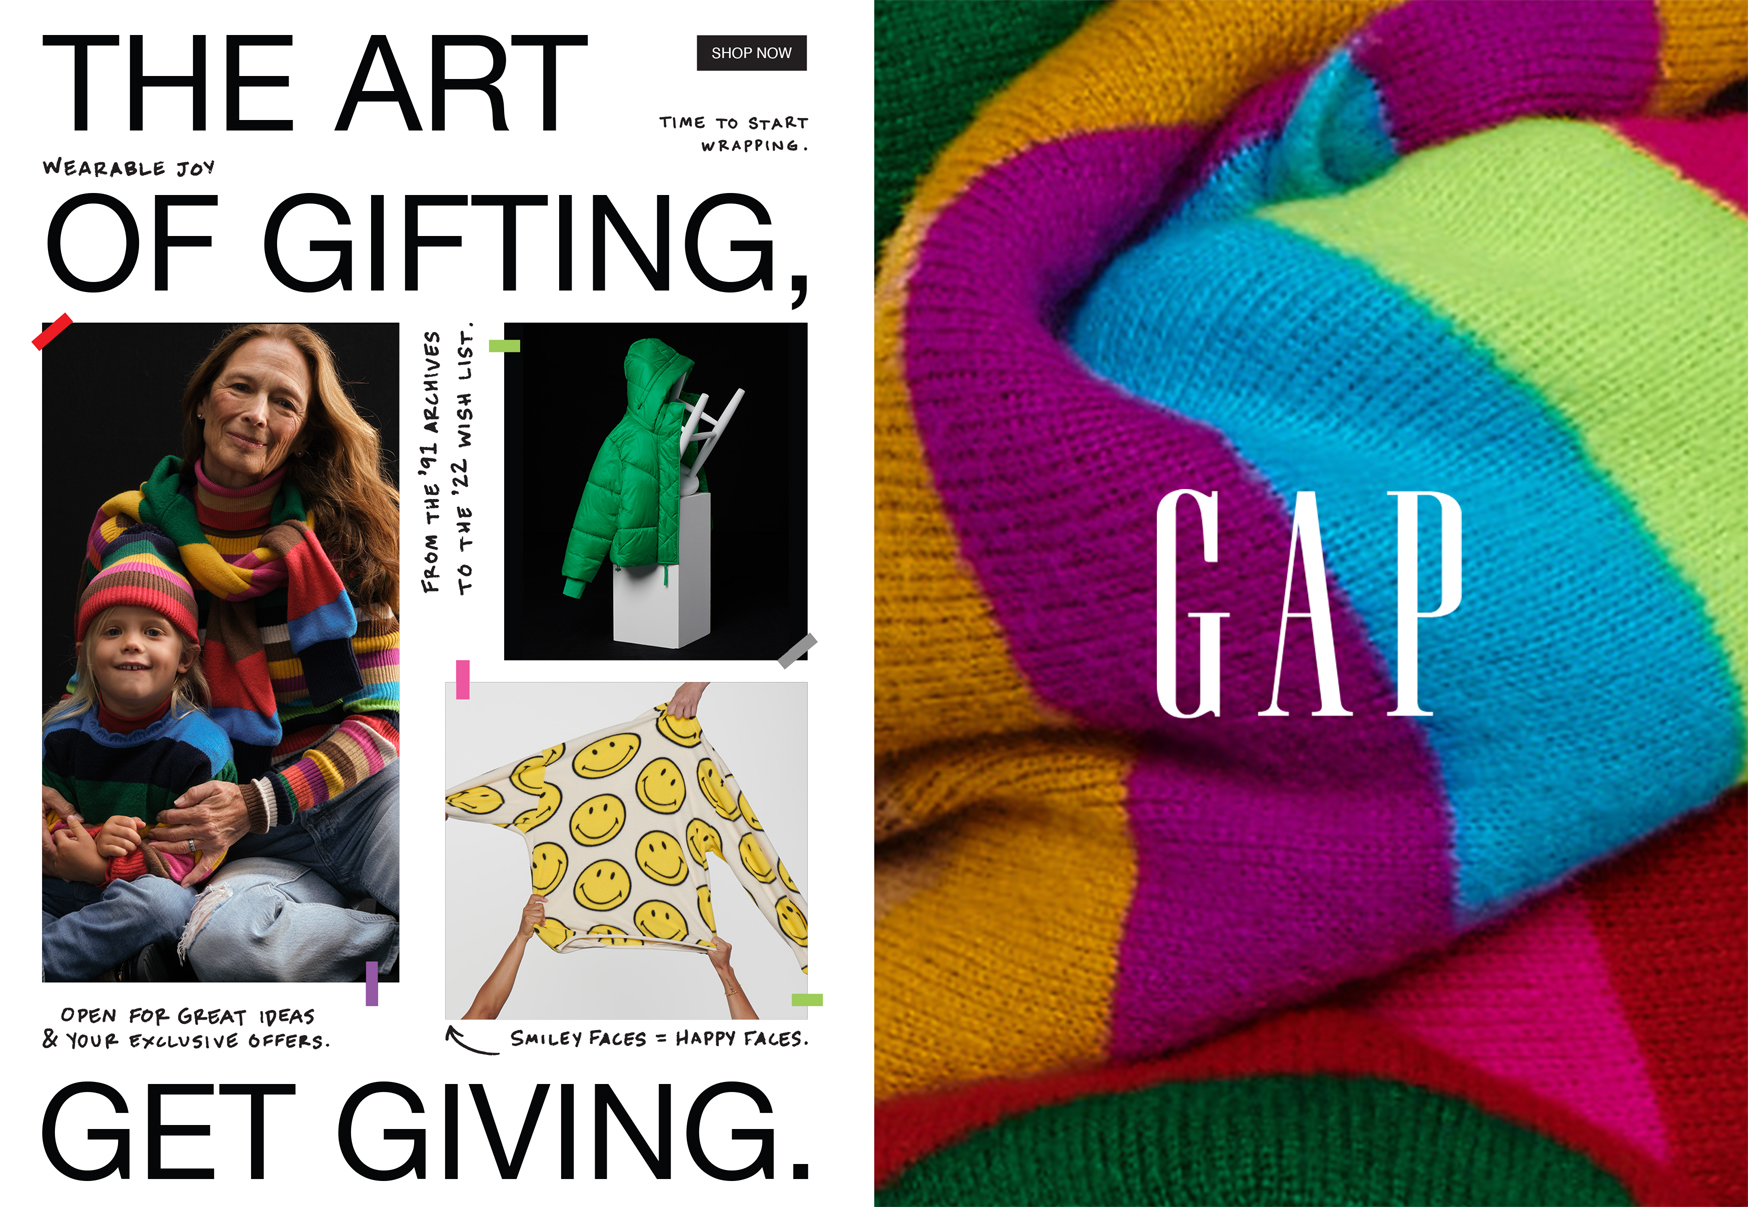 GAP THE ART OF GIFTING, GET GIVING